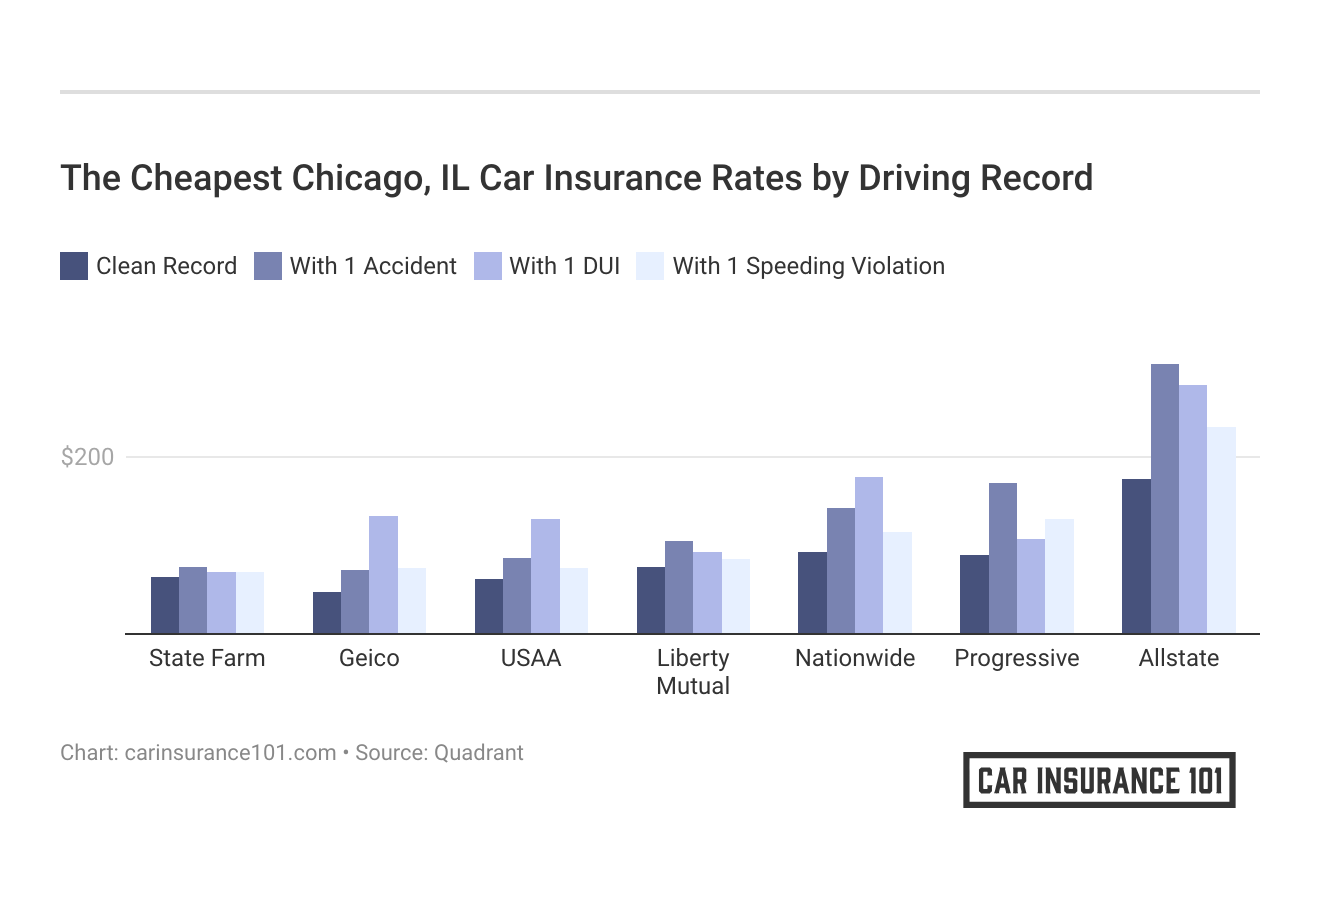 <h3>The Cheapest Chicago, IL Car Insurance Rates by Driving Record</h3>